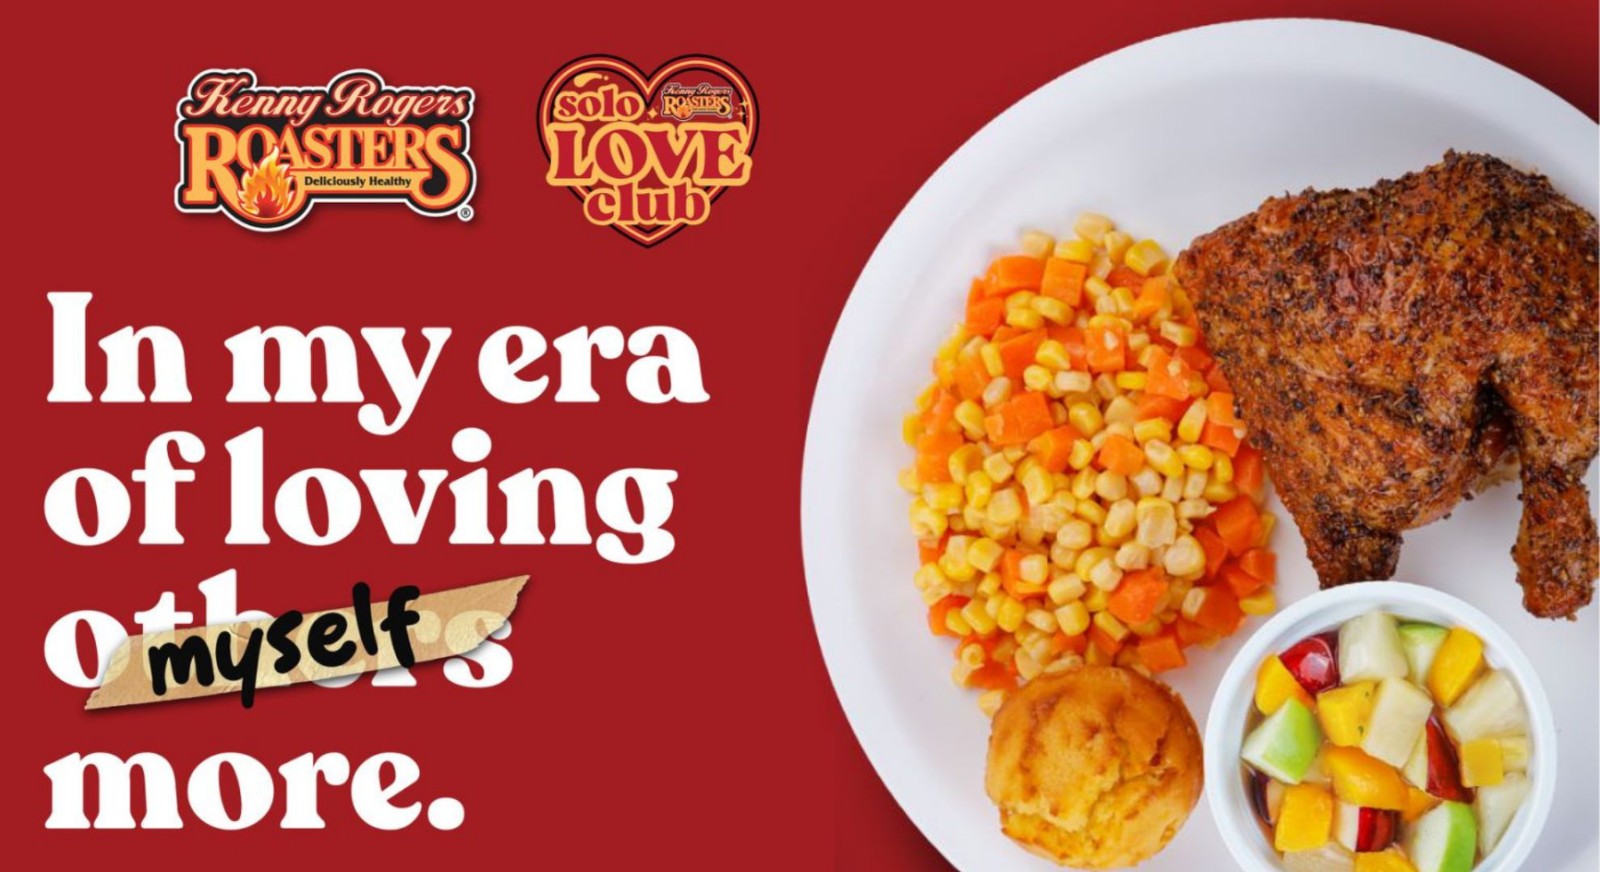 Alone but not lonely: Celebrate ‘solo love’ this Valentine’s at Kenny Rogers Roasters